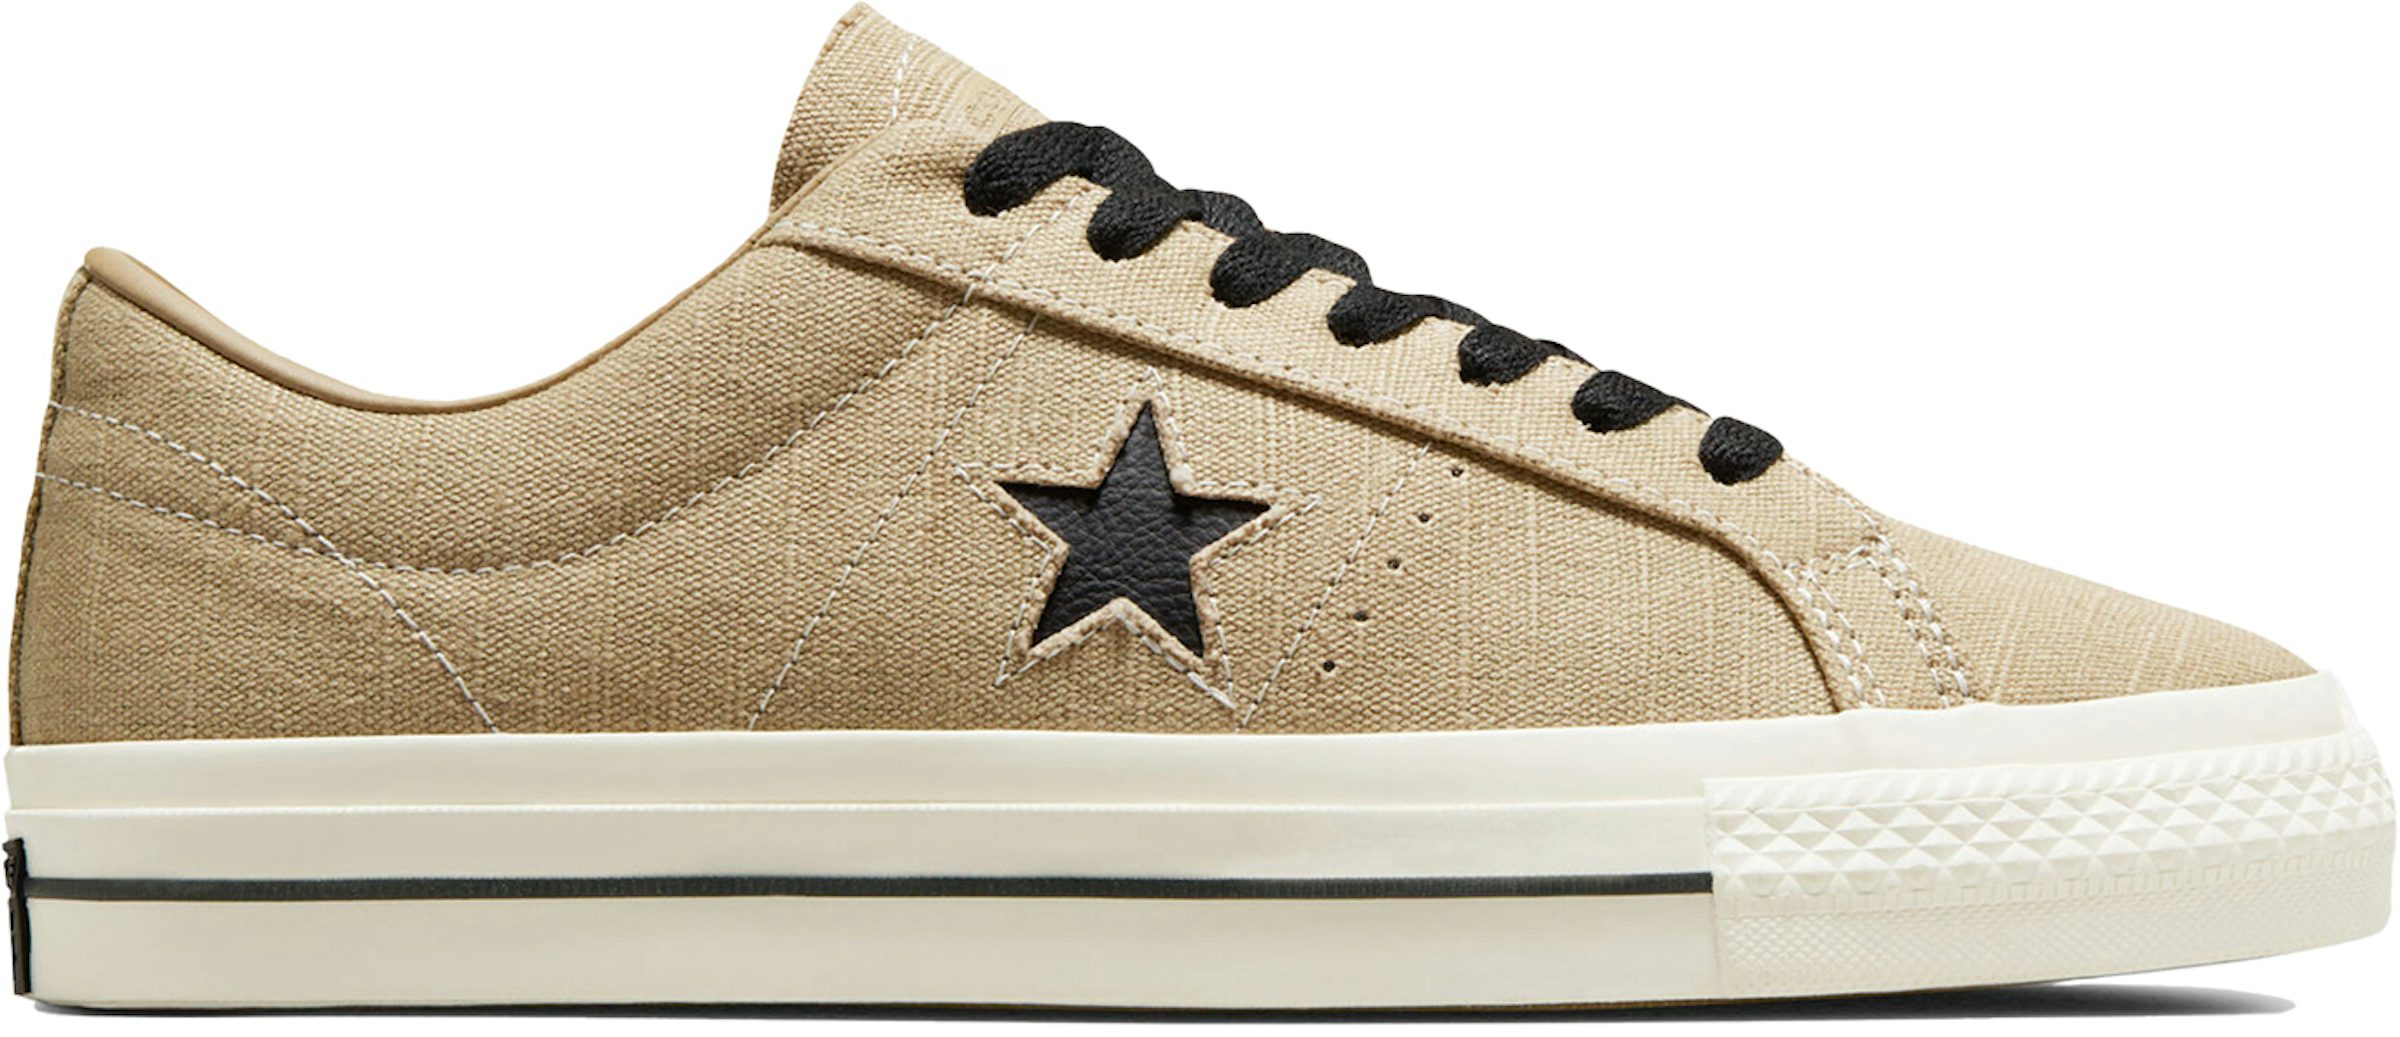 Buy Converse One Star Shoes & New Sneakers -